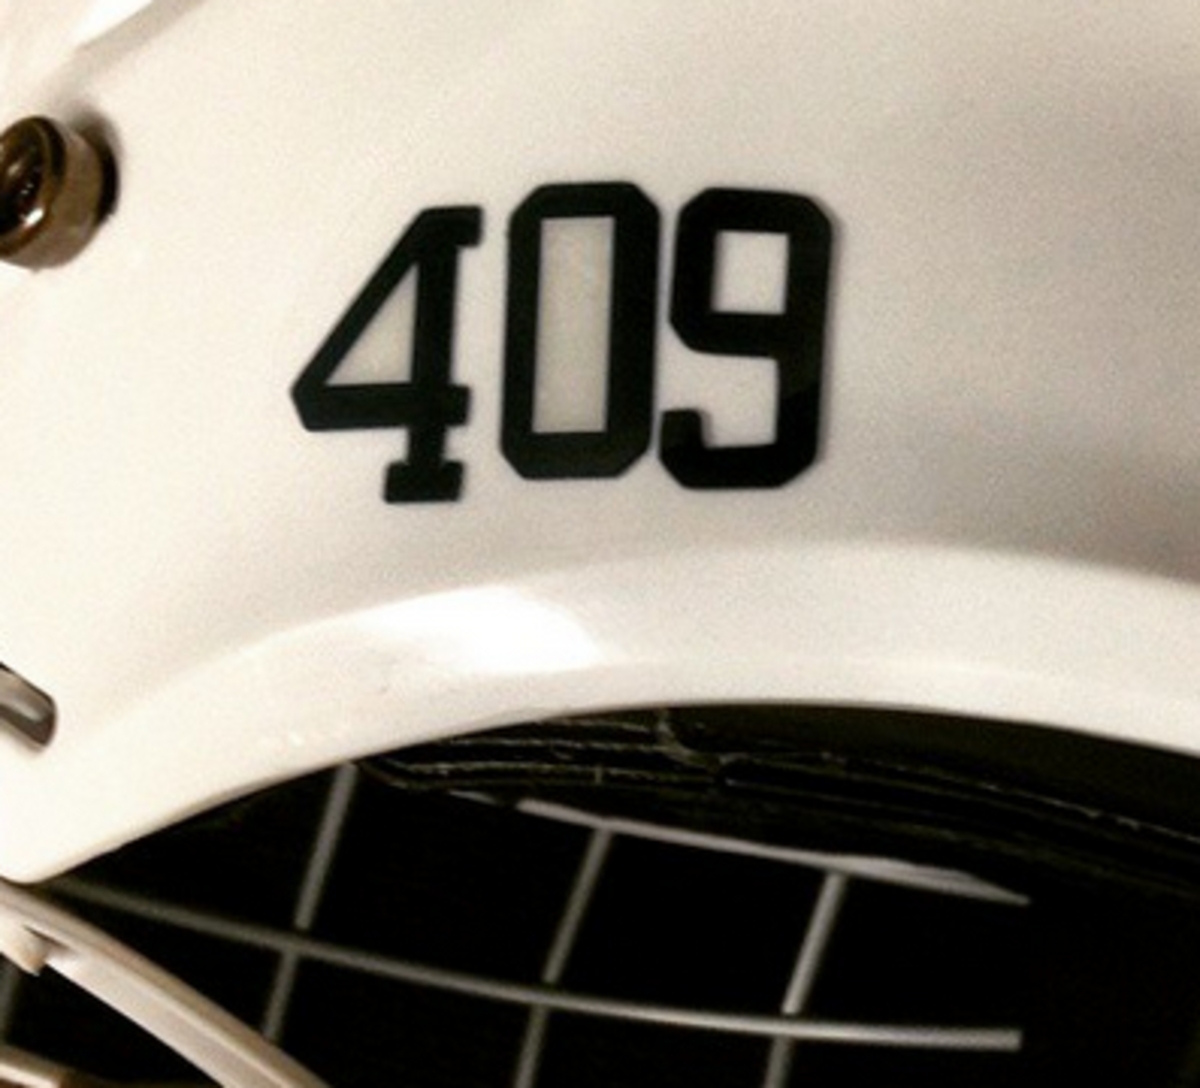 Penn State hockey's '409' decals.